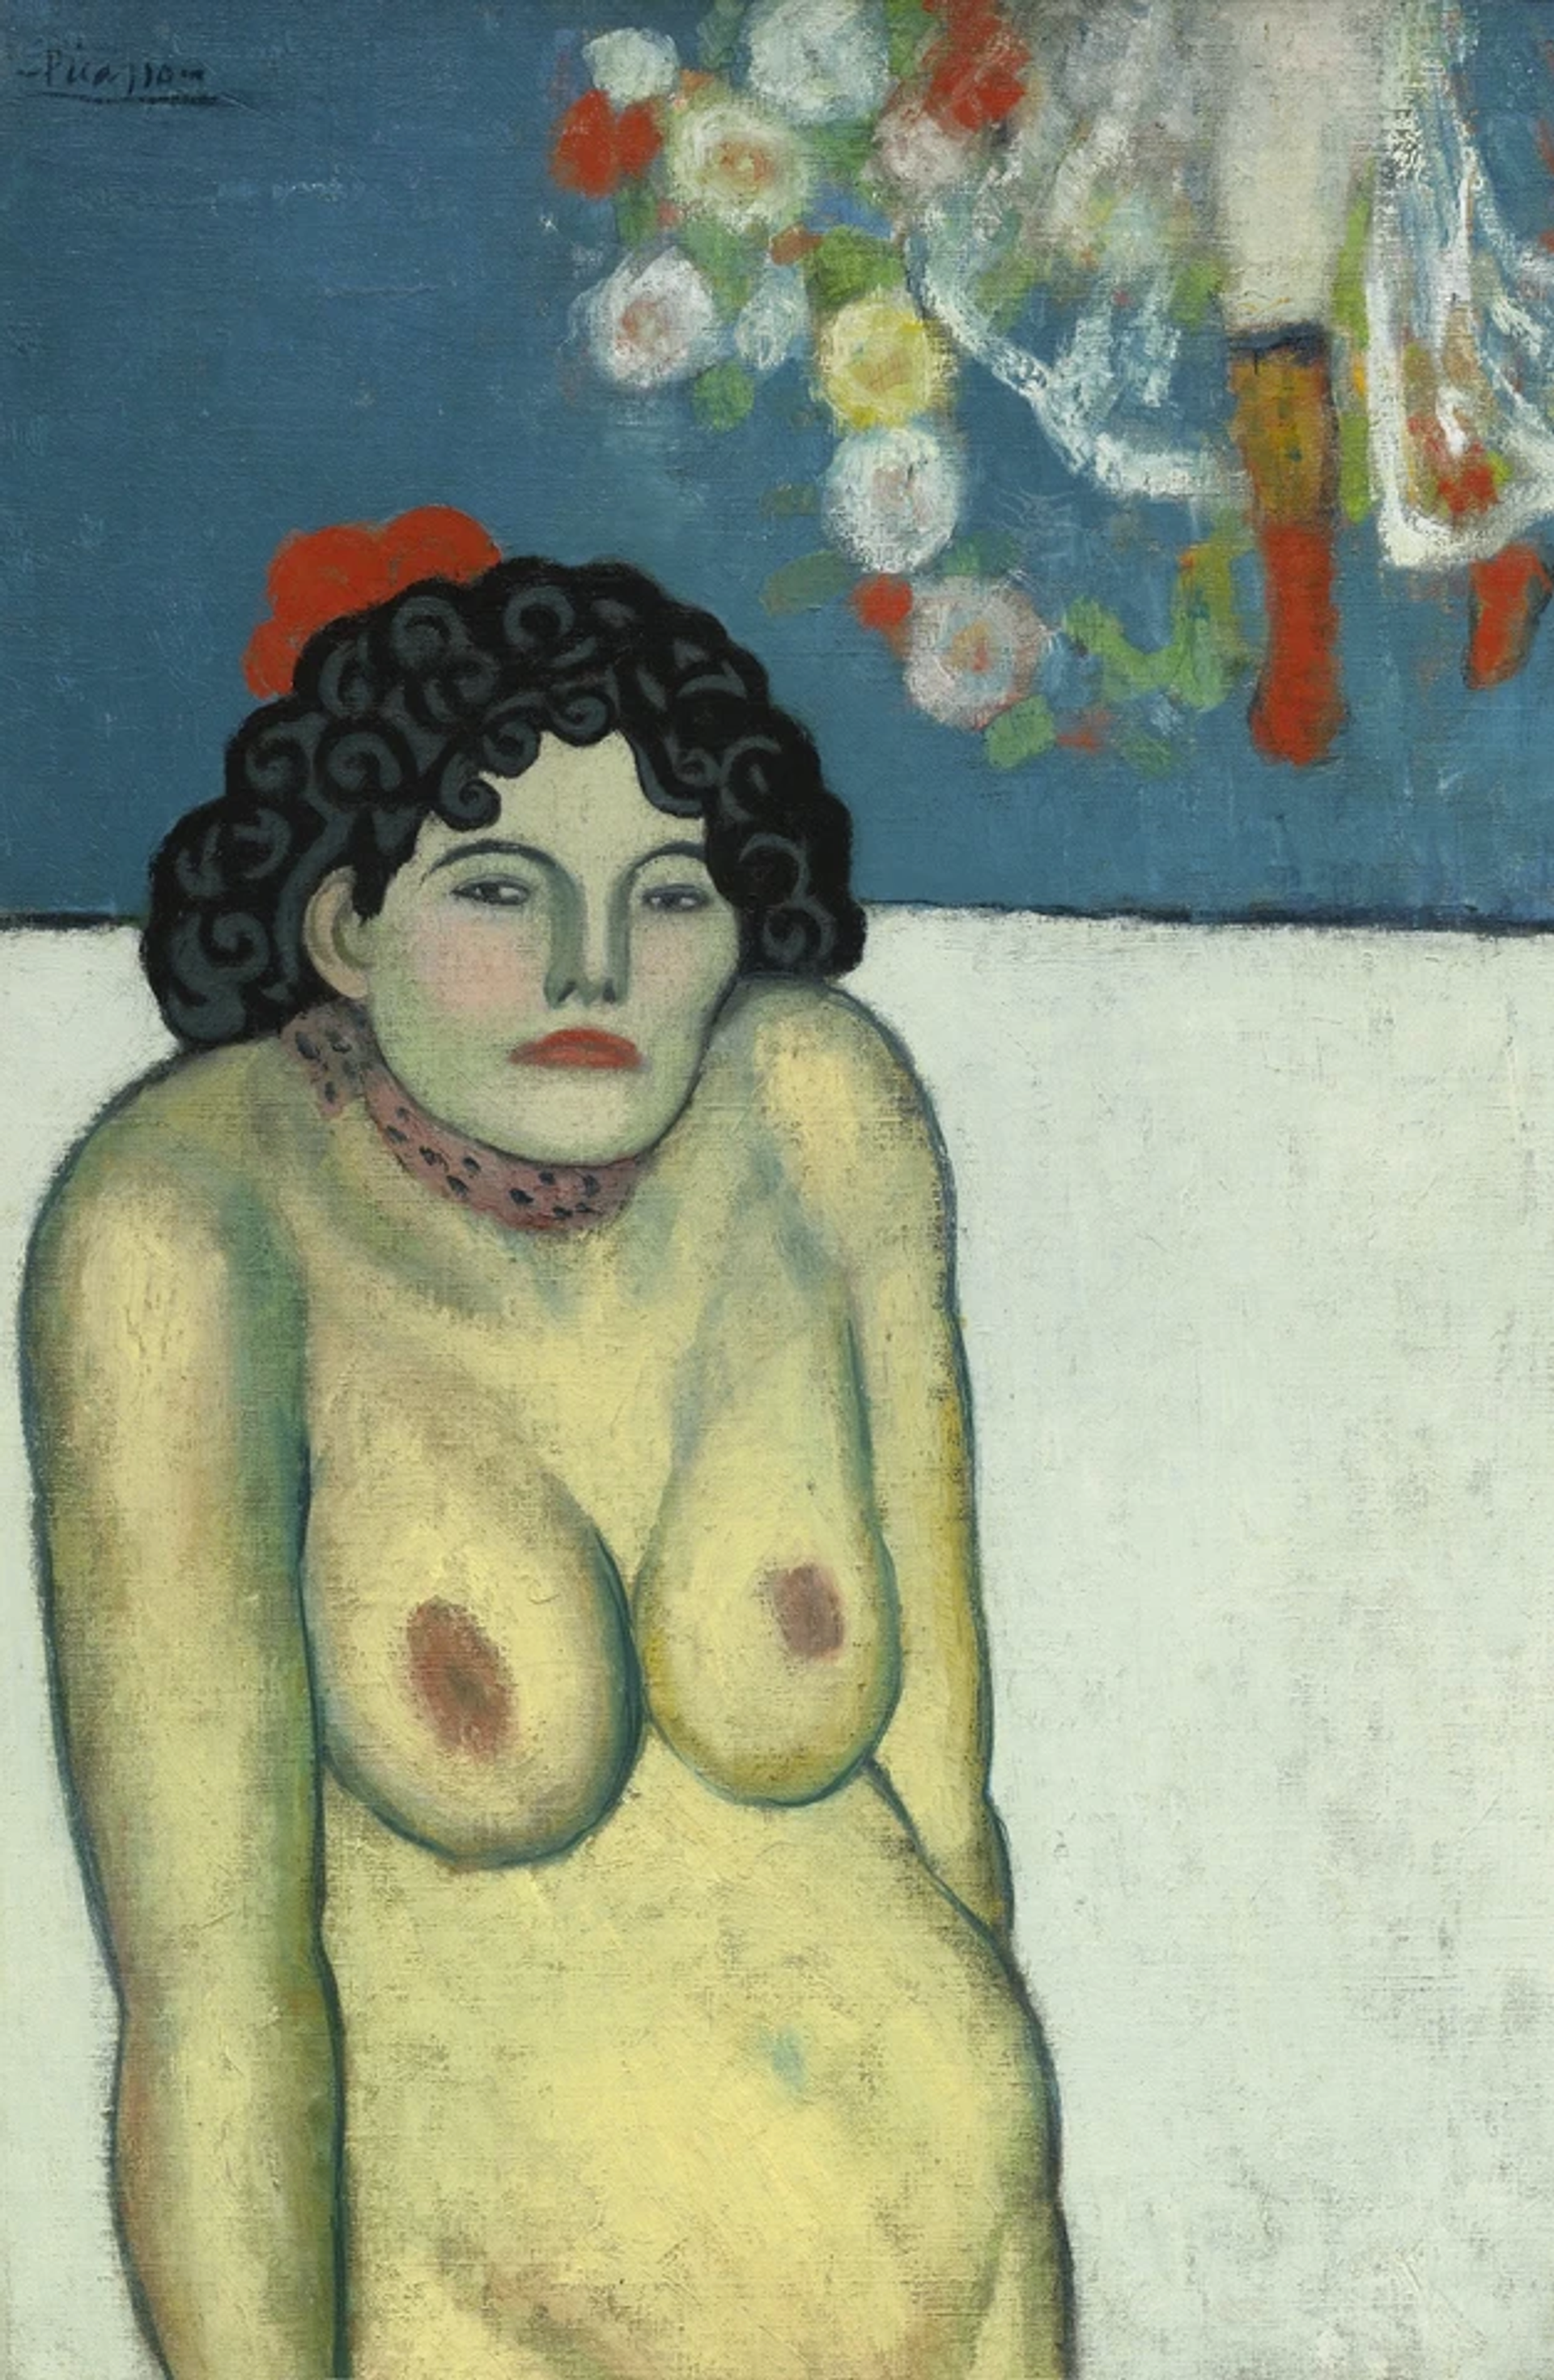 Painted portrait by Pablo Picasso depicting a nude woman in a hunched position, standing in front of a greyish white and muted blue background.